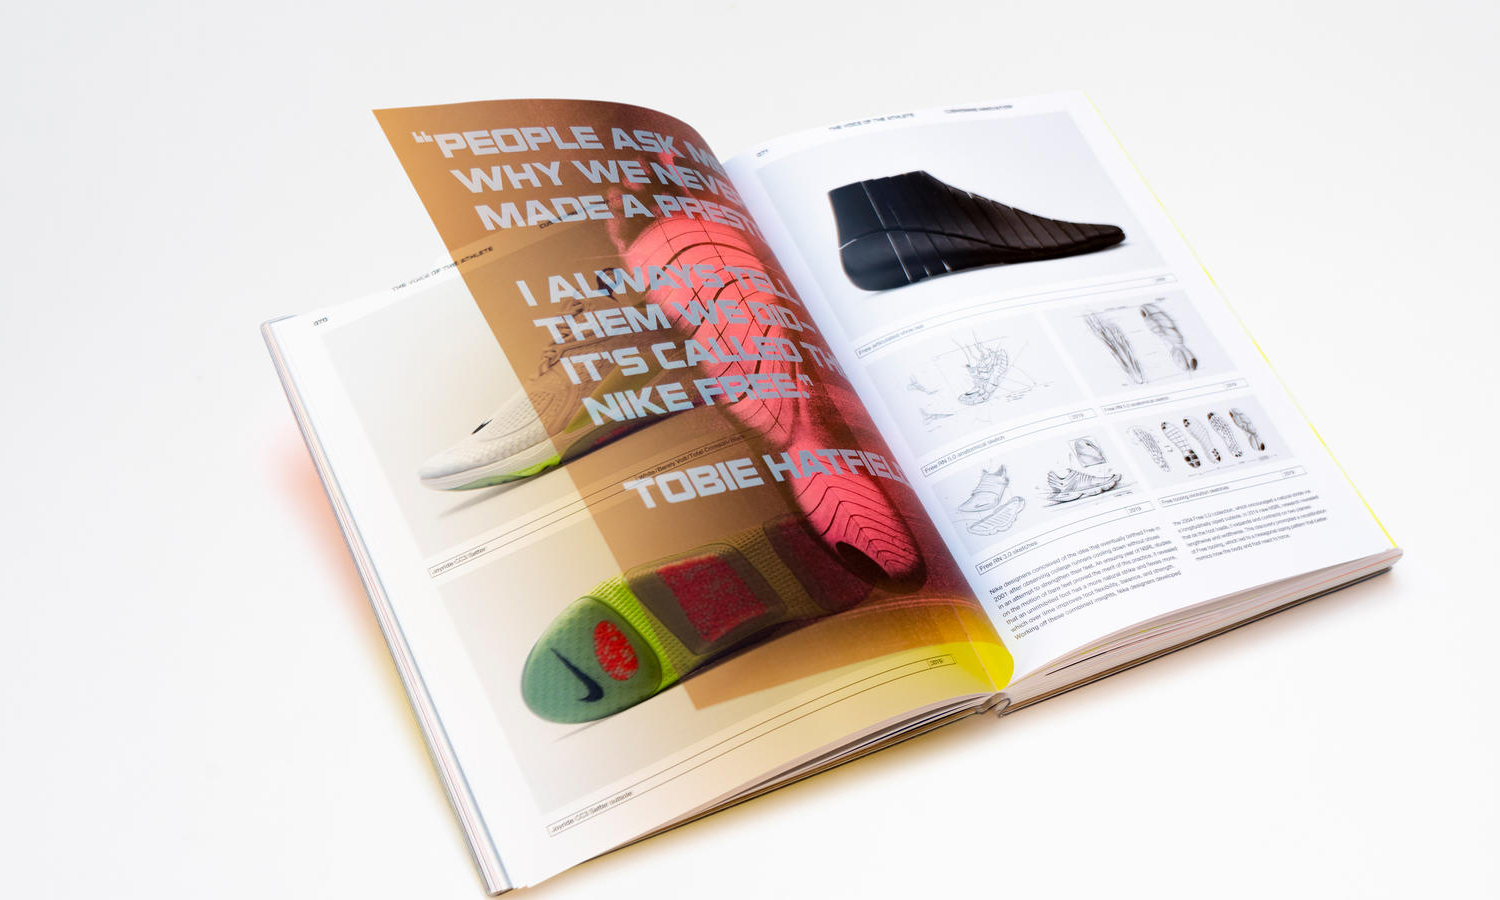 Phaidon 发布《Nike: Better Is Temporary》设计图鉴